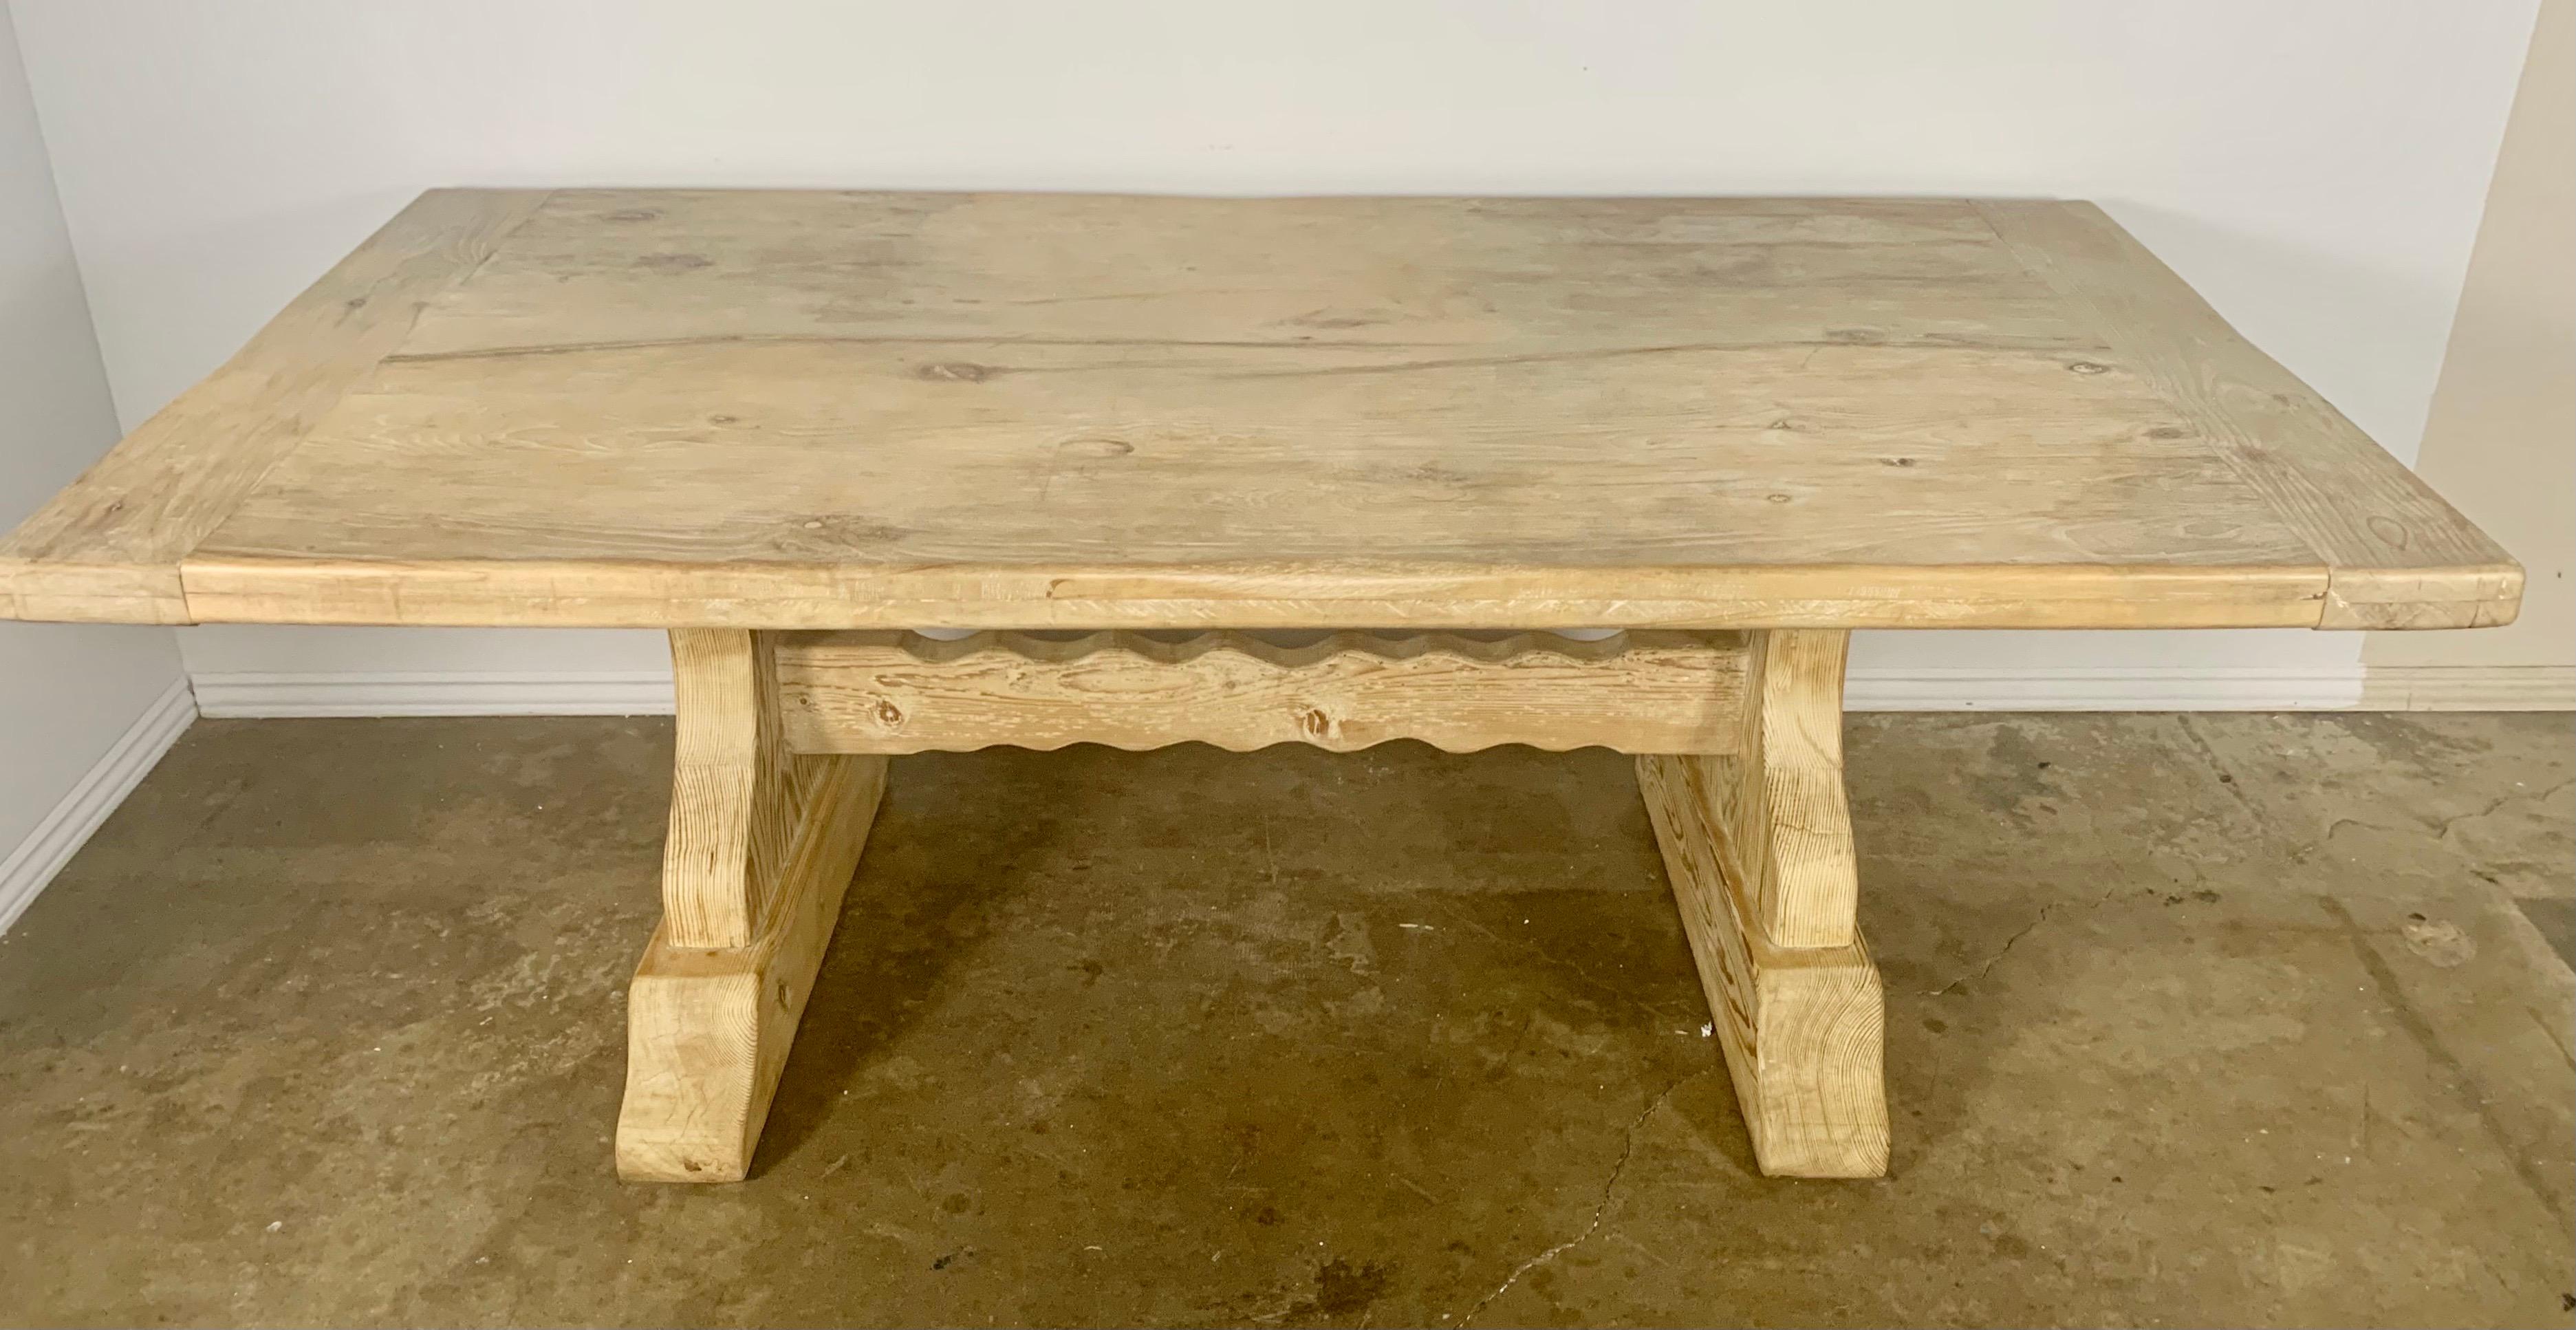 Bleached Spanish style pine dining table. Two pedestals hold up the large rectangular top. The pedestals are connected by a center stretcher. The table is sturdy and has a beautiful worn bleached finish.